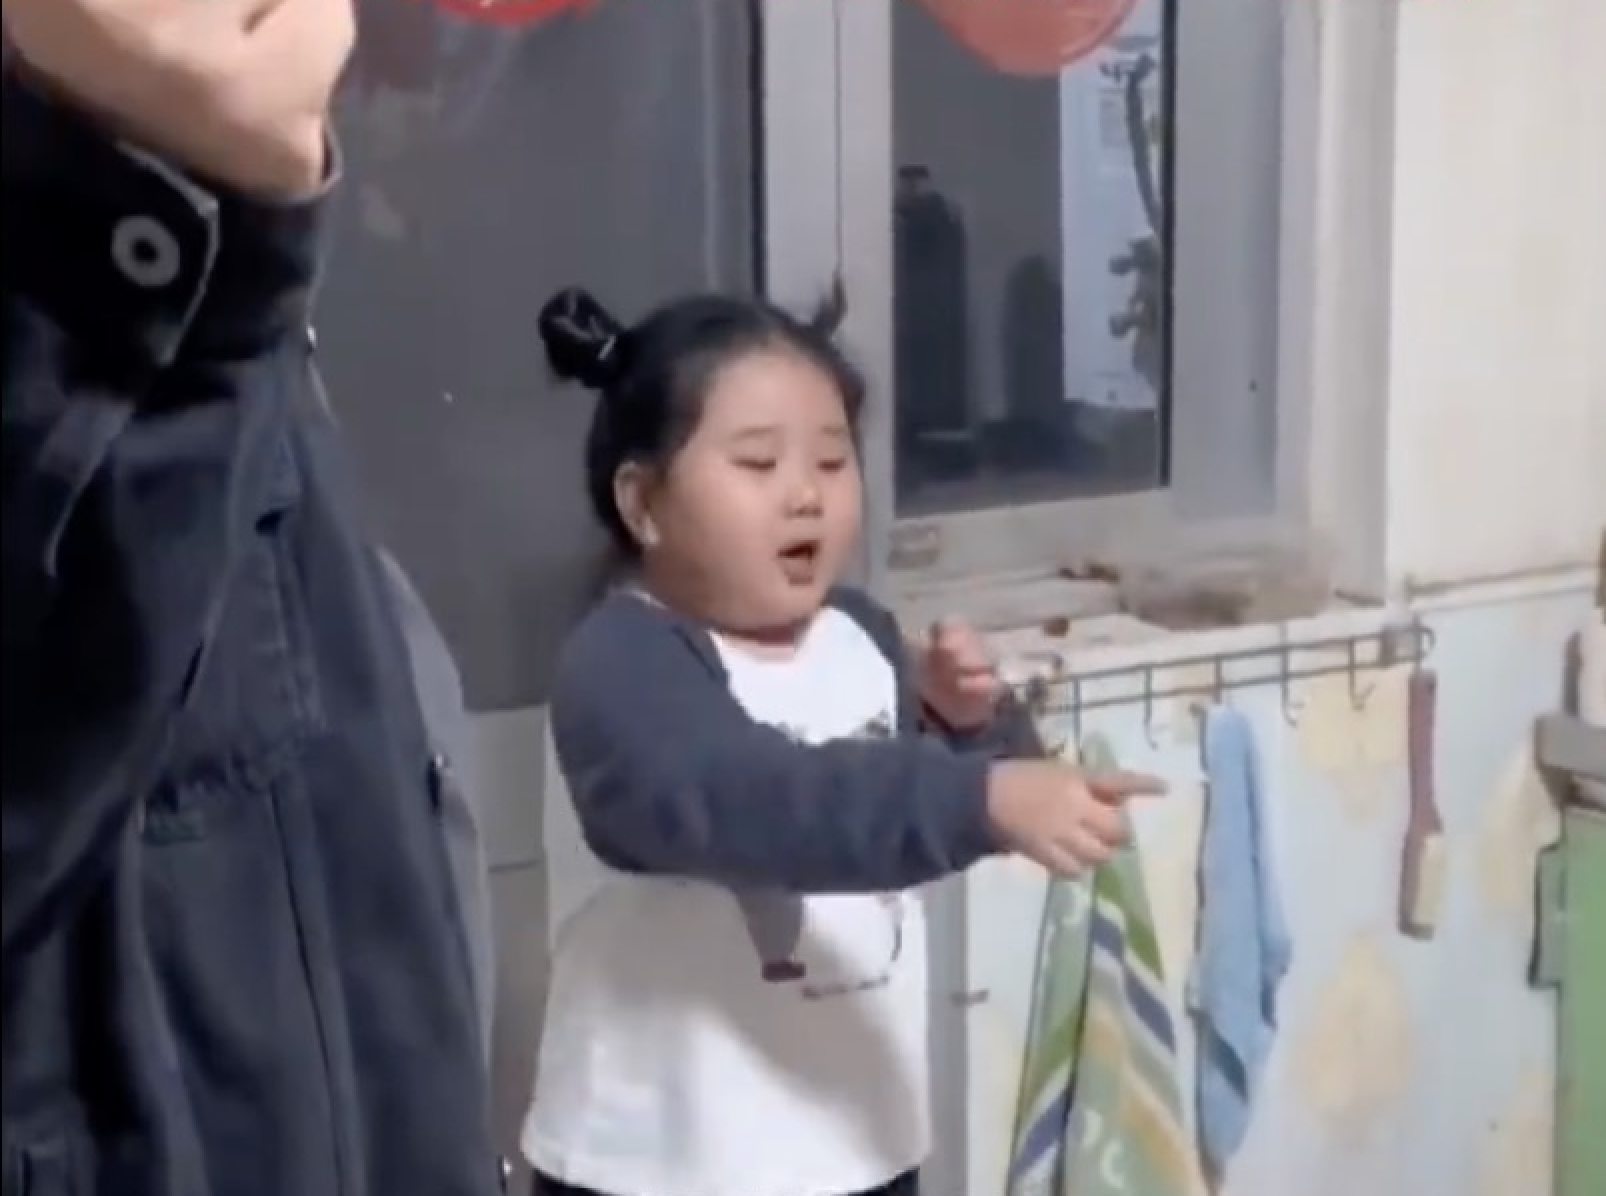 ‘baby teacher’: china girl, 5, teaches family what she learned at kindergarten with after-dinner exercise routines, delights mainland social media